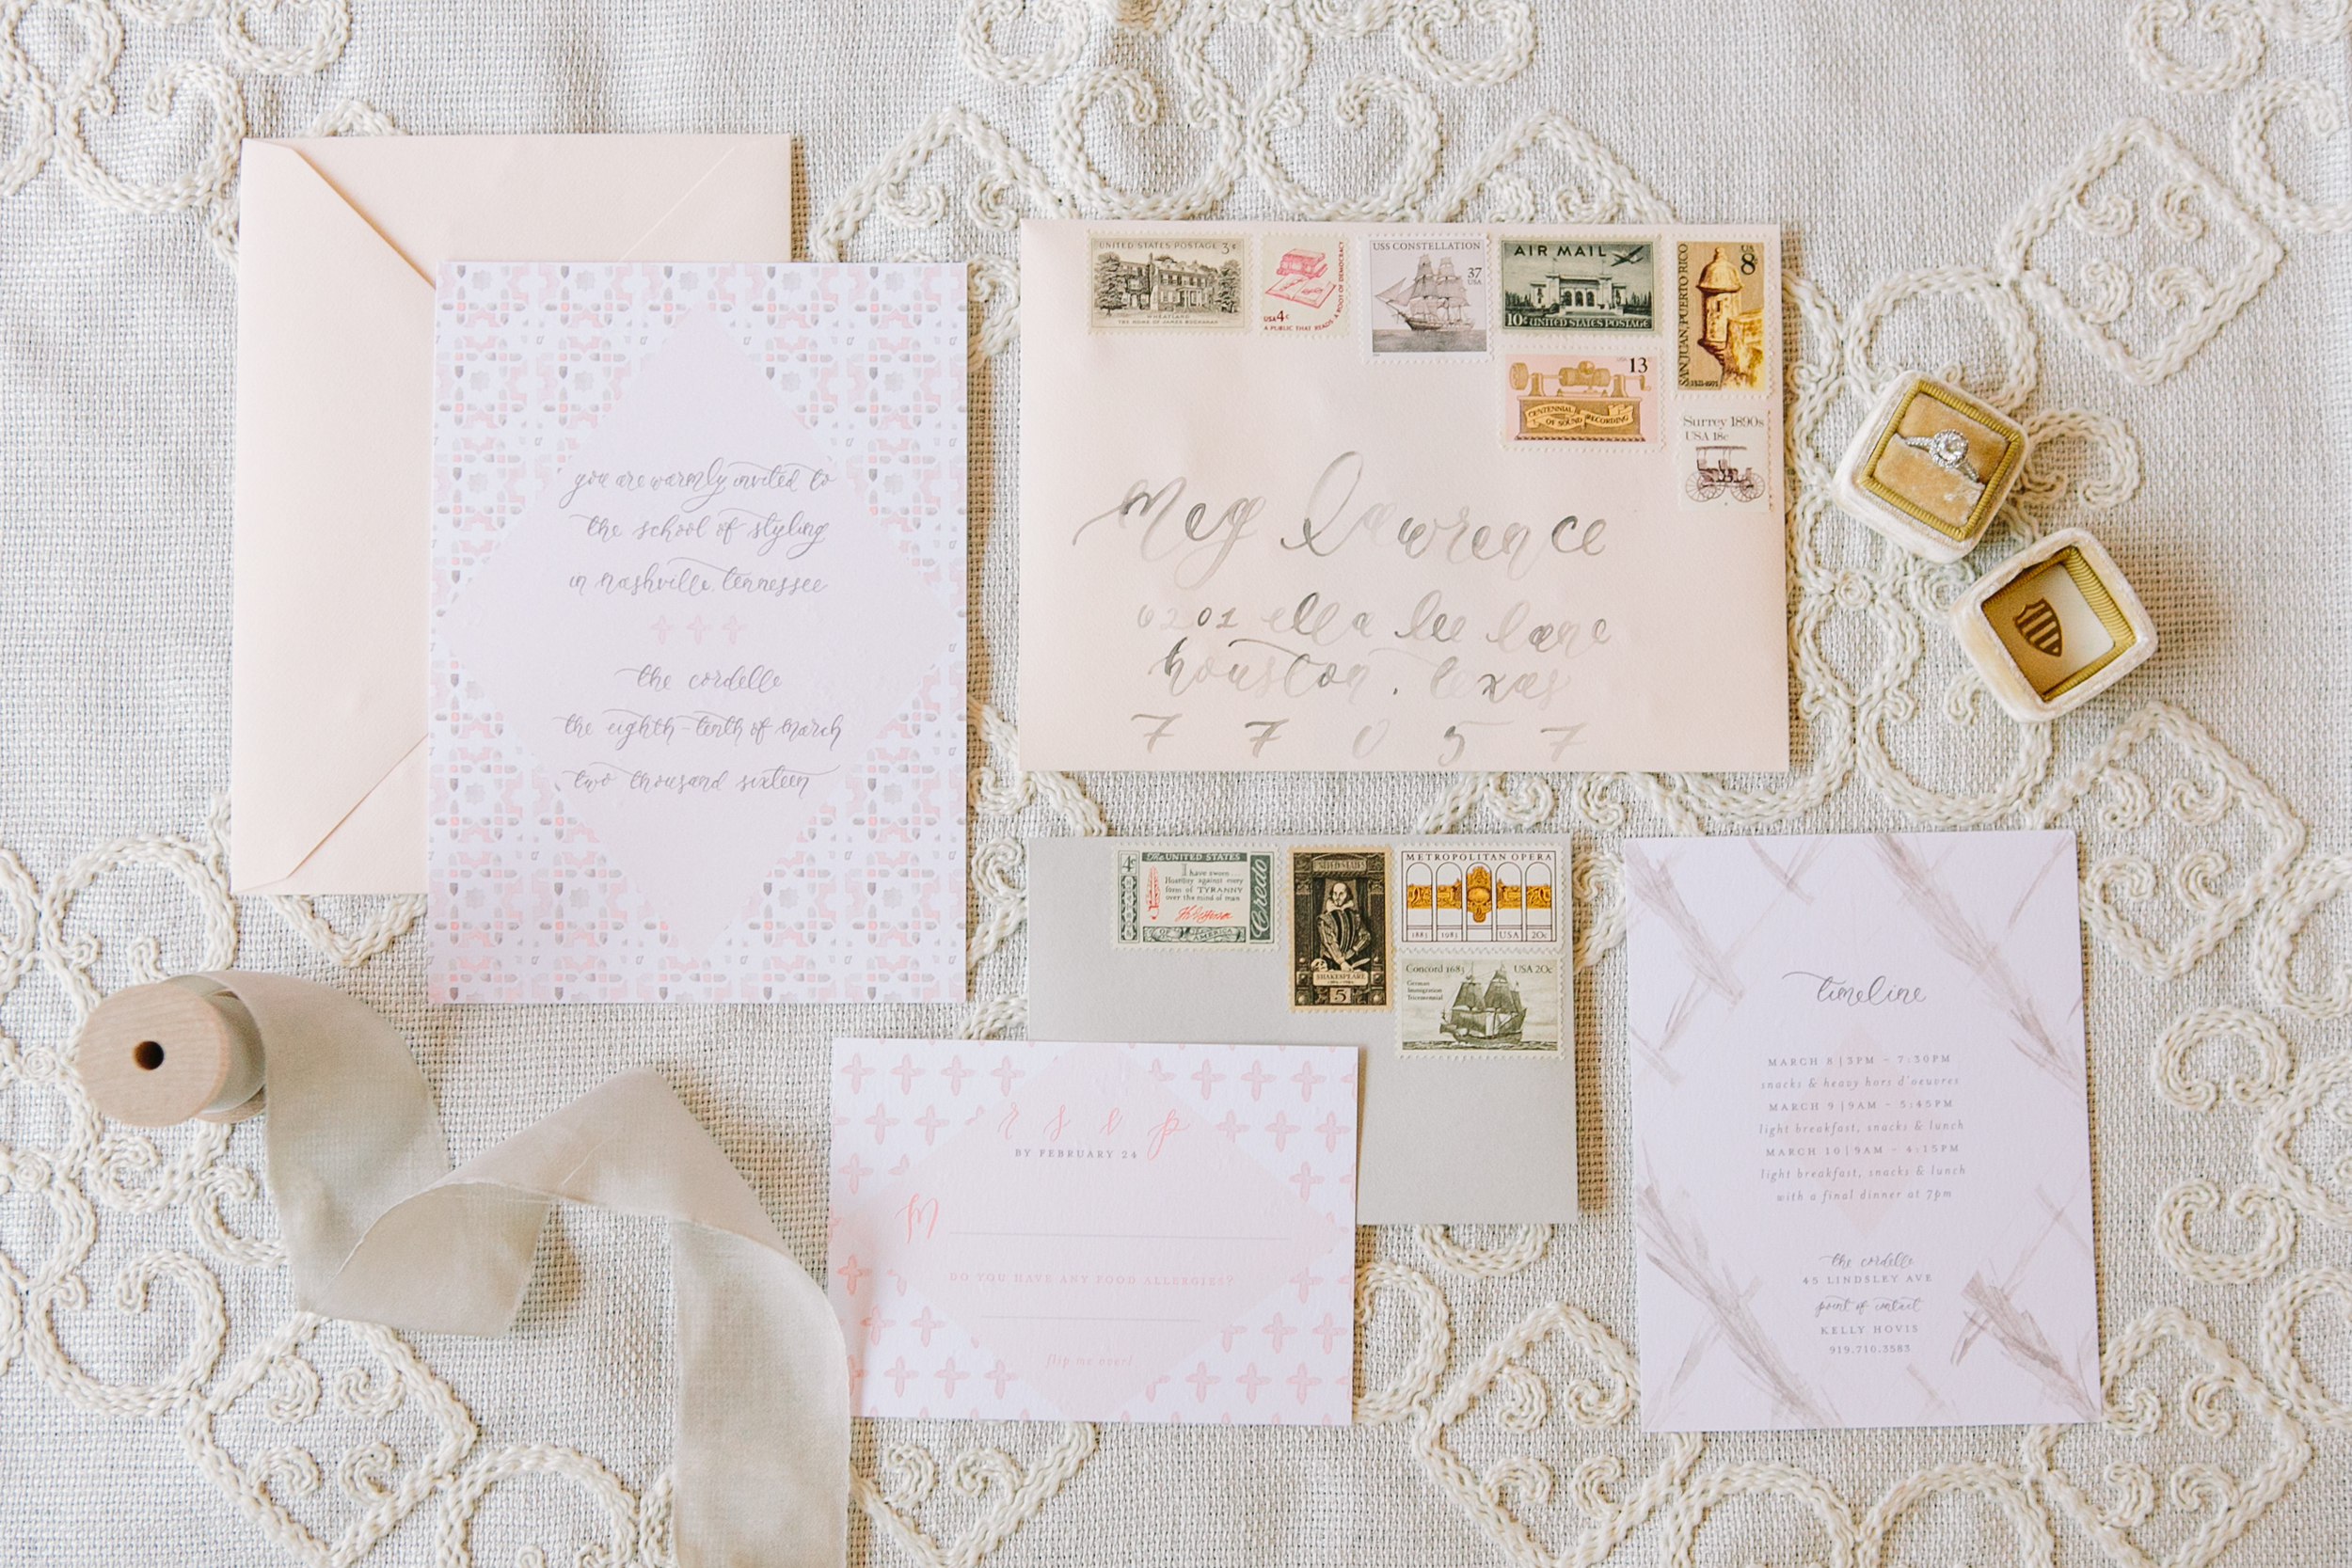  Photo: Love, the Nelsons + Styling: Kaitlin Holland + Invitation: Simply Jessica Marie  